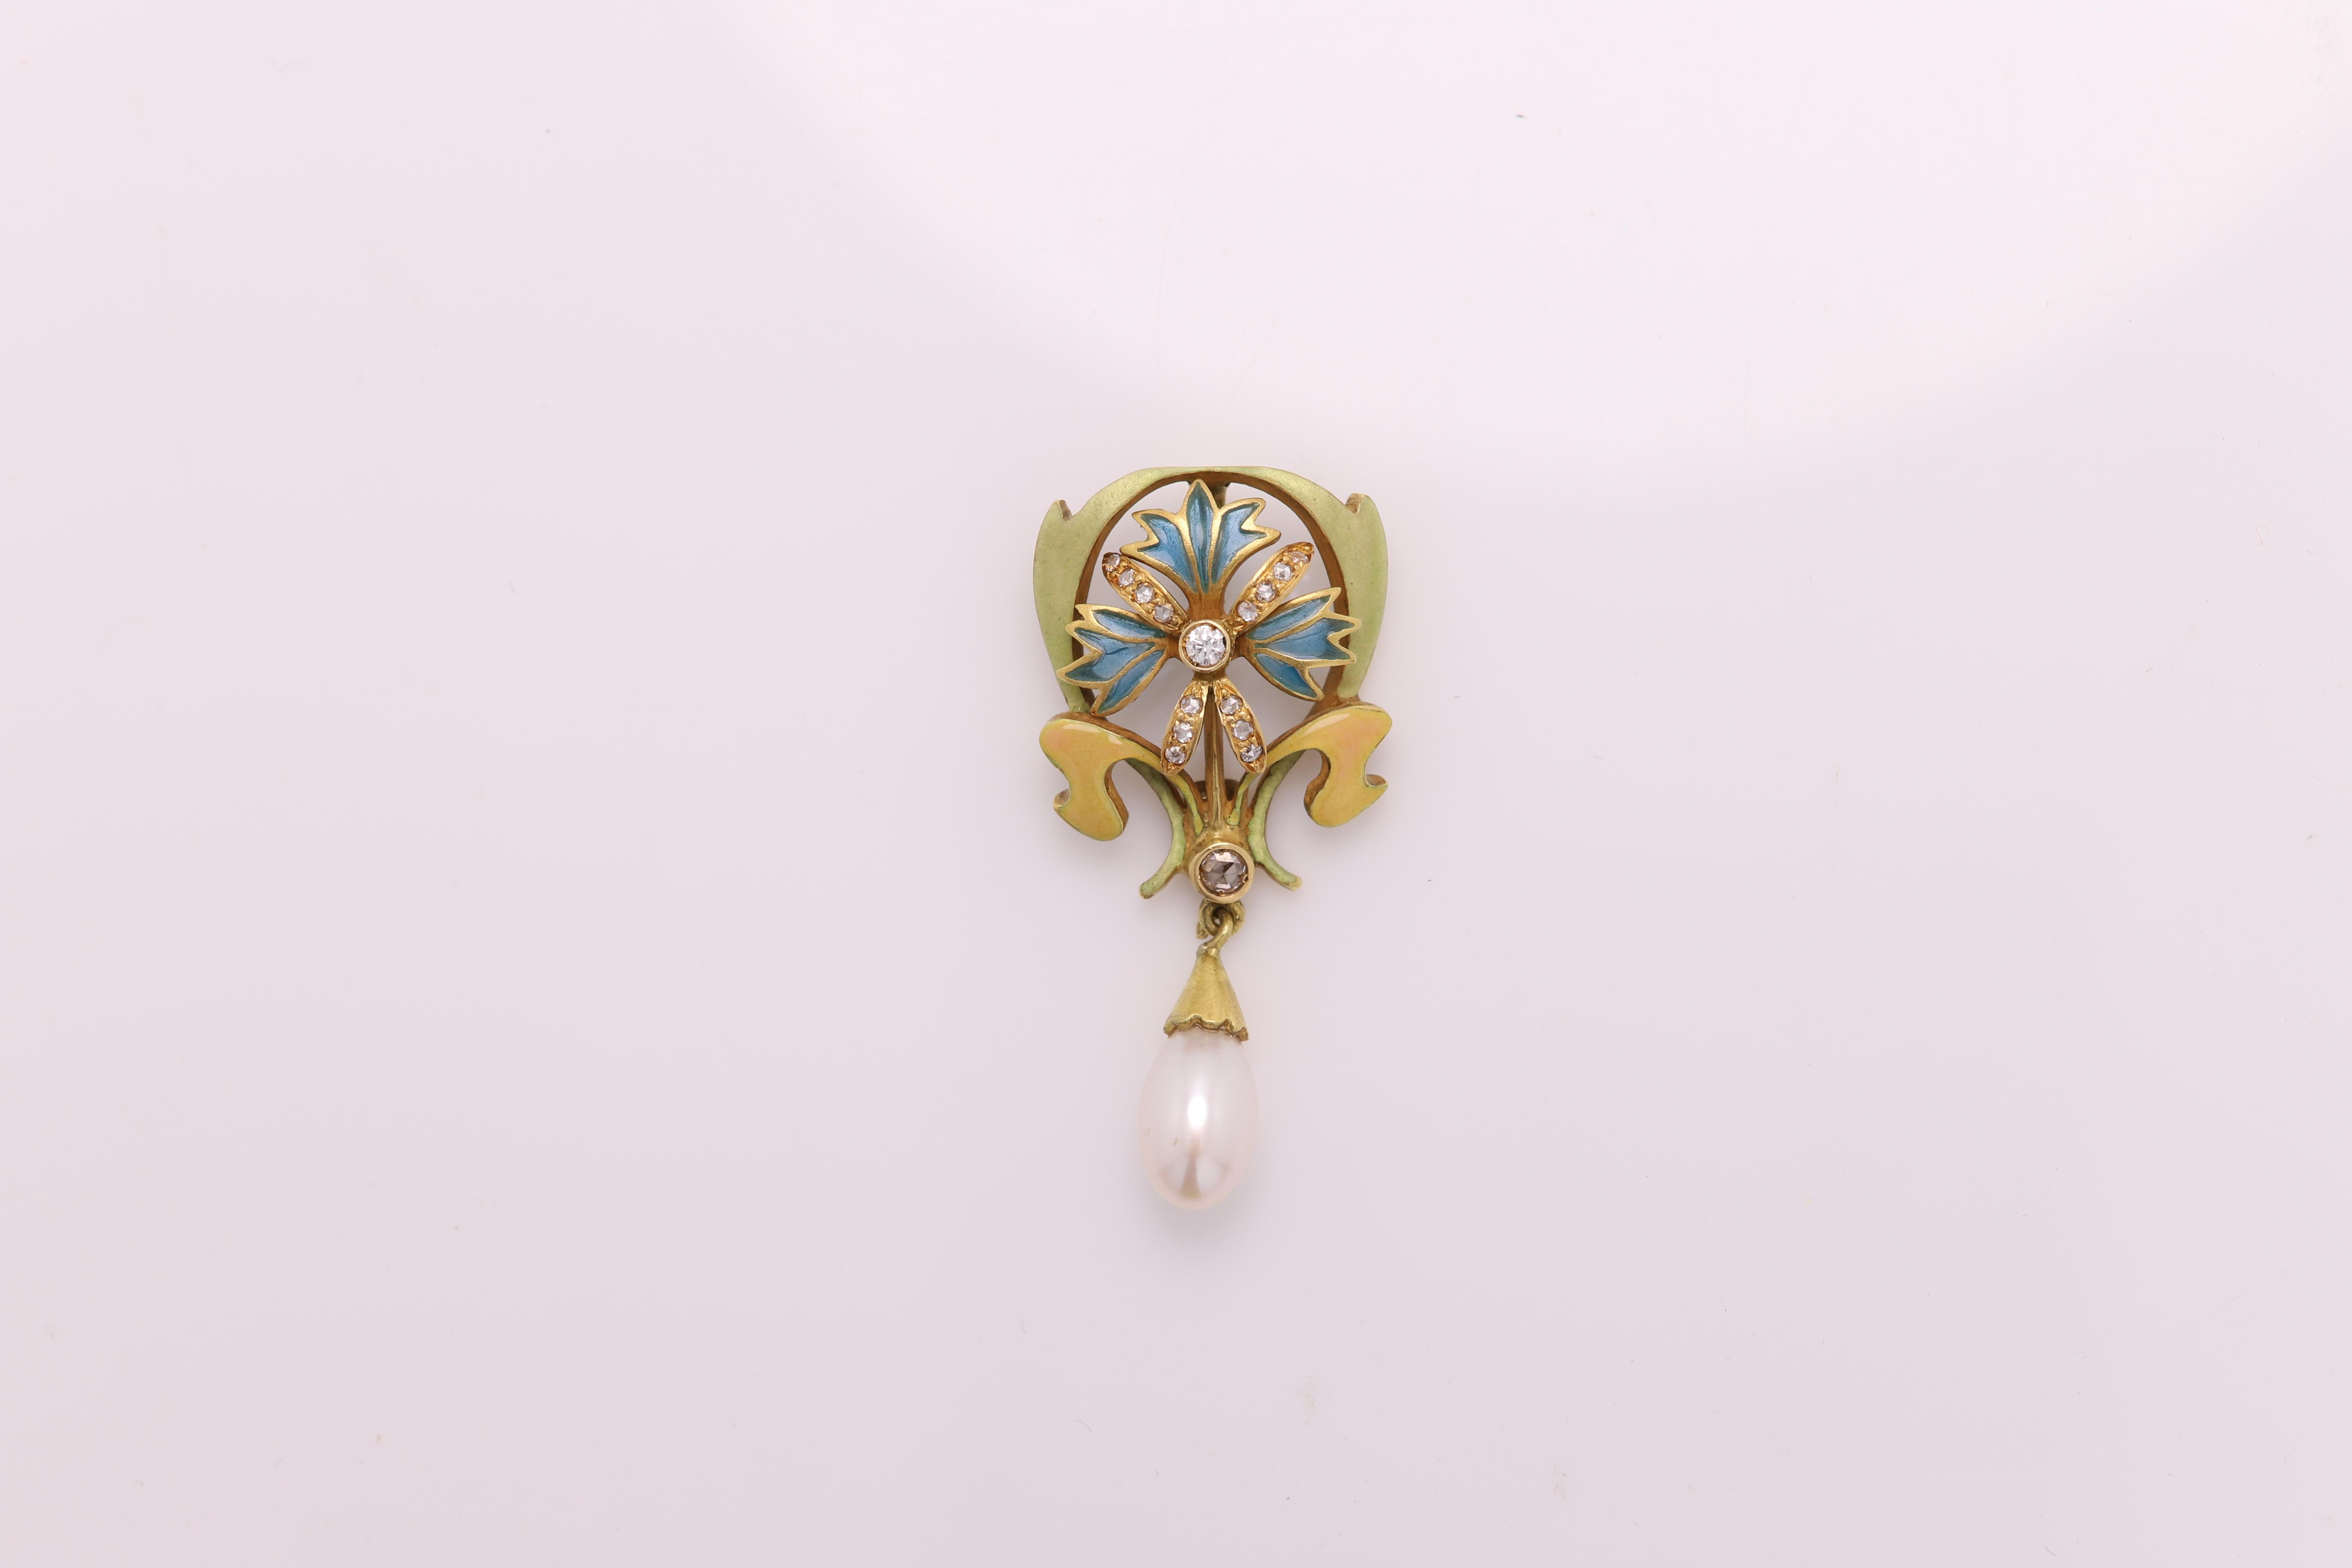 Vintage Hand made in Spain Enamel pendant
18K Yellow Gold 
approx size 1.5'  inch
has few small diamonds and a pearl dangling
Weight approx 6.3 grams
Style is based from the period of Nouveau 
approx made 20+ years ago
Overall great condition (a bit